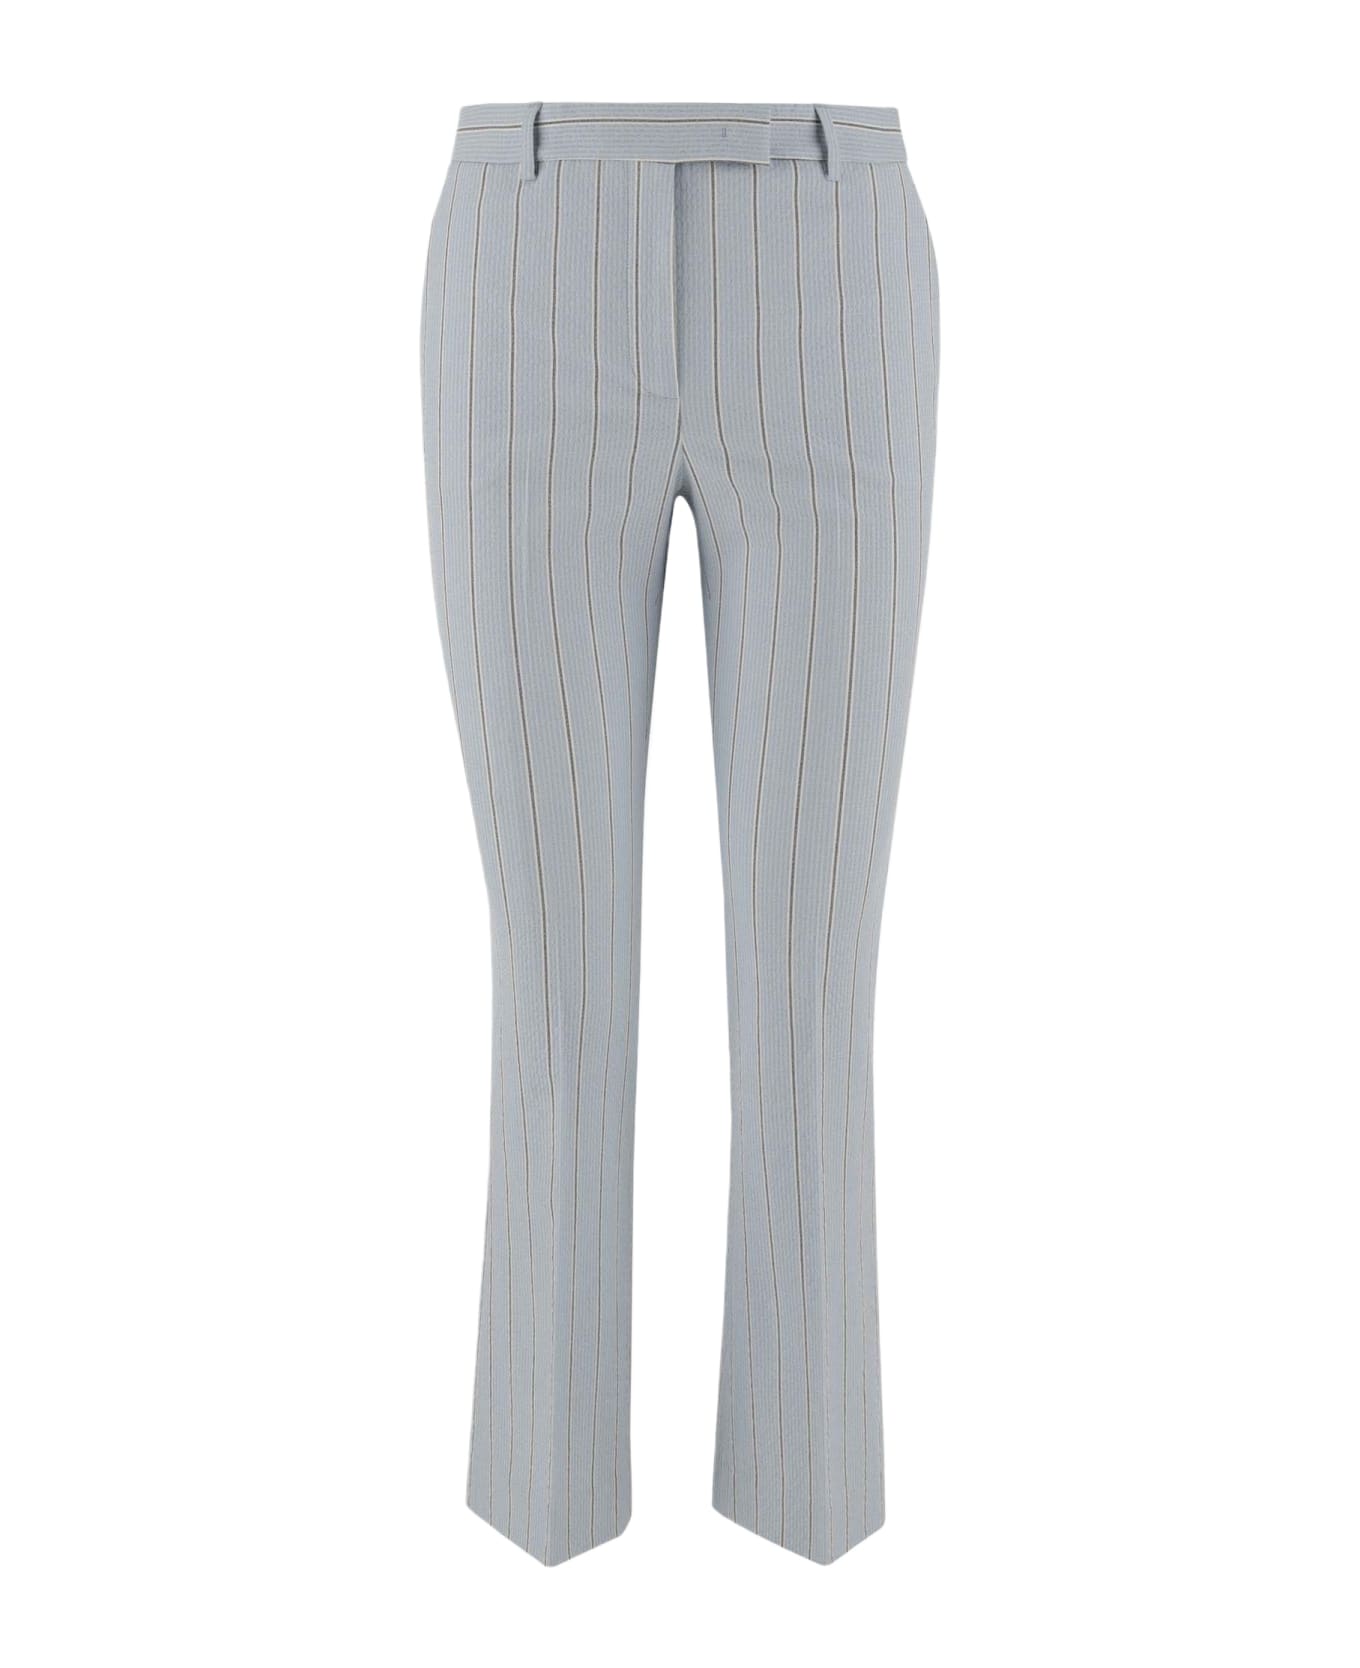 QL2 Cotton Blend Pants With Striped Pattern - Grey ボトムス